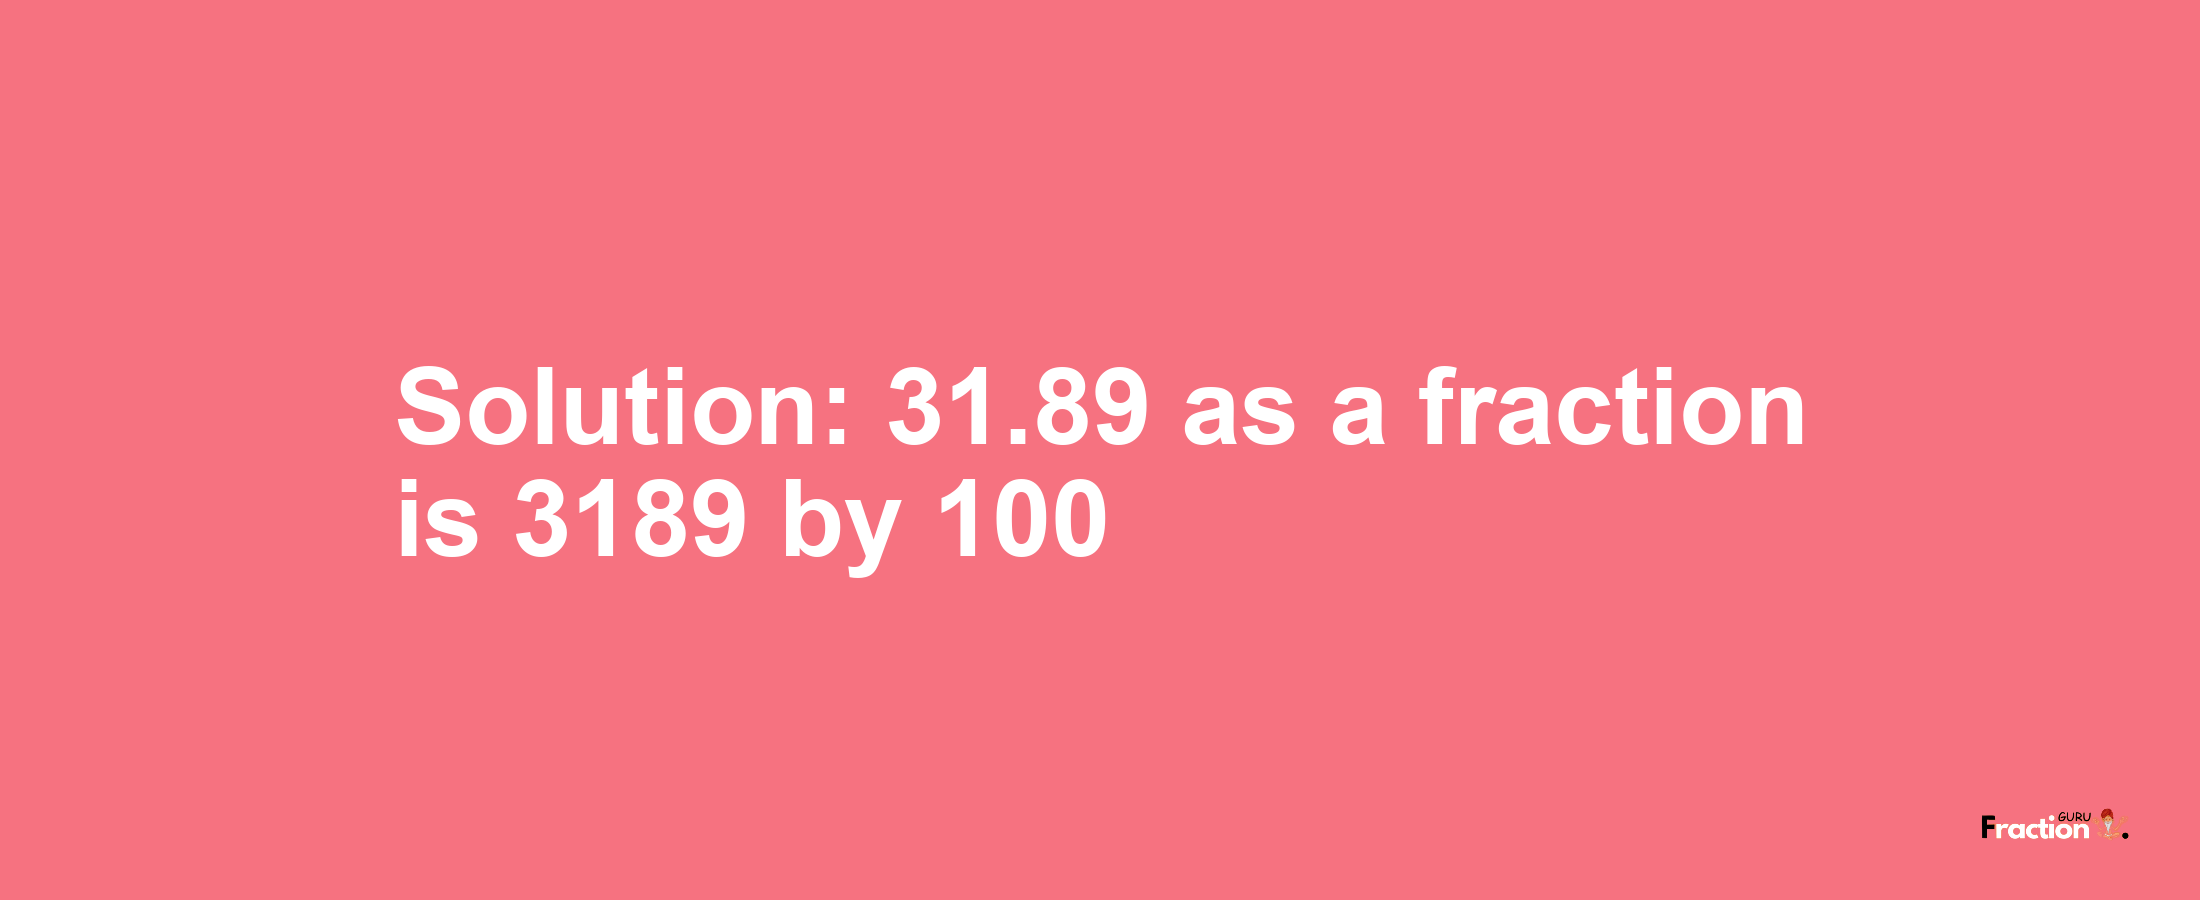 Solution:31.89 as a fraction is 3189/100